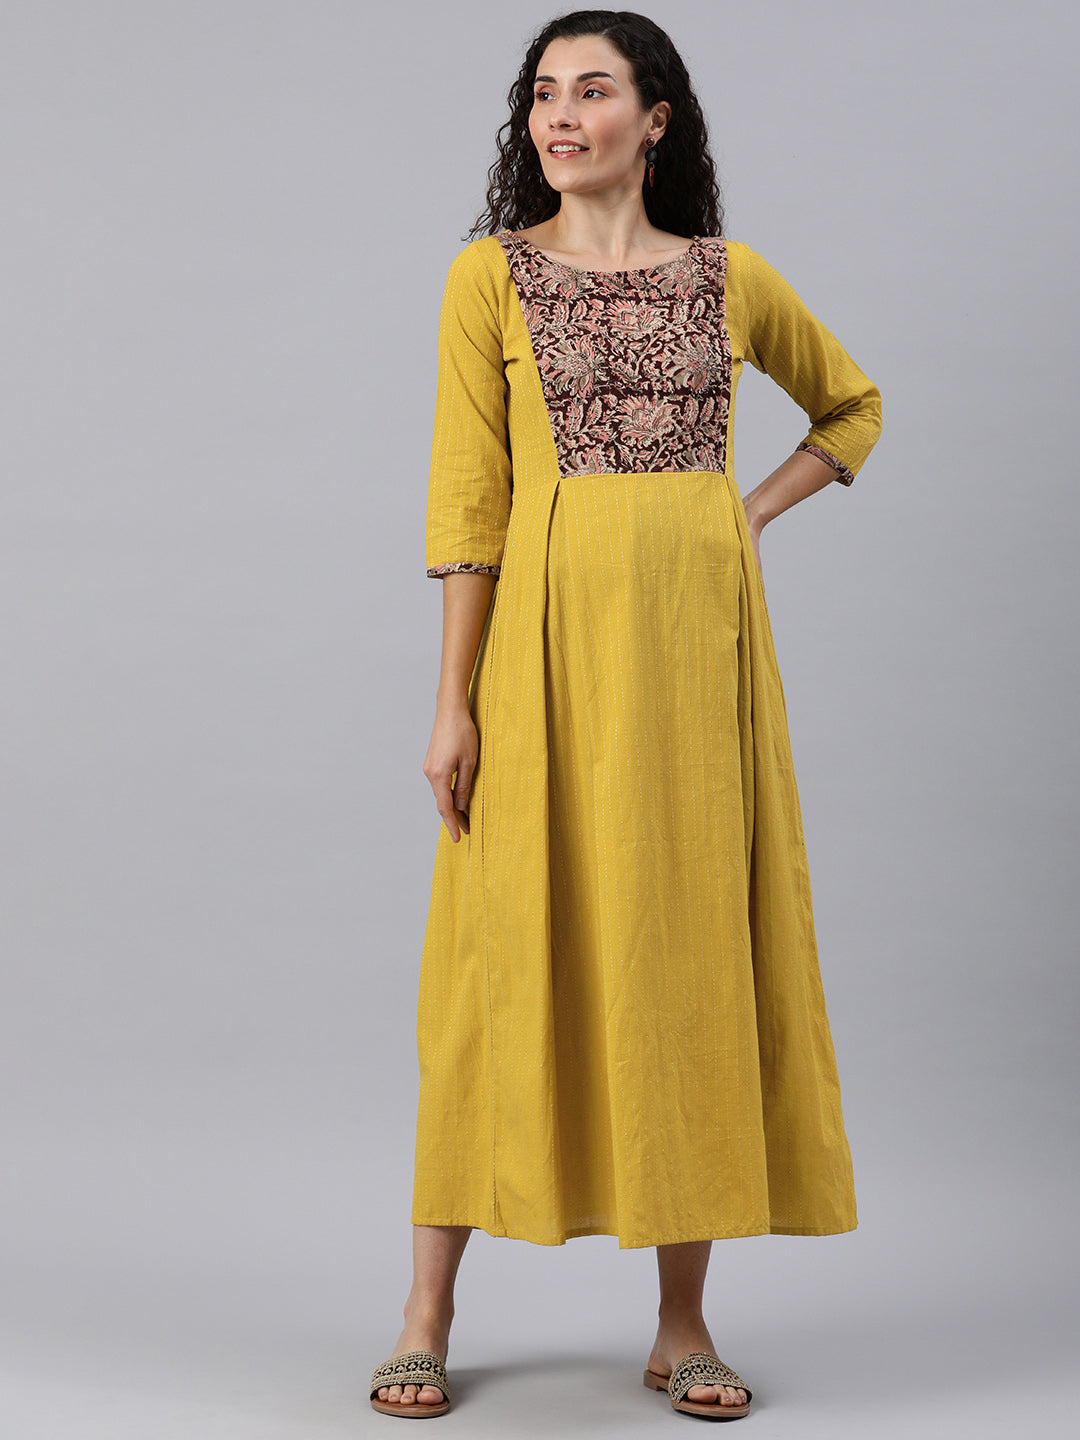 Yellow with Maroon Floral Yoke Printed Cotton Maternity Maxi Dress